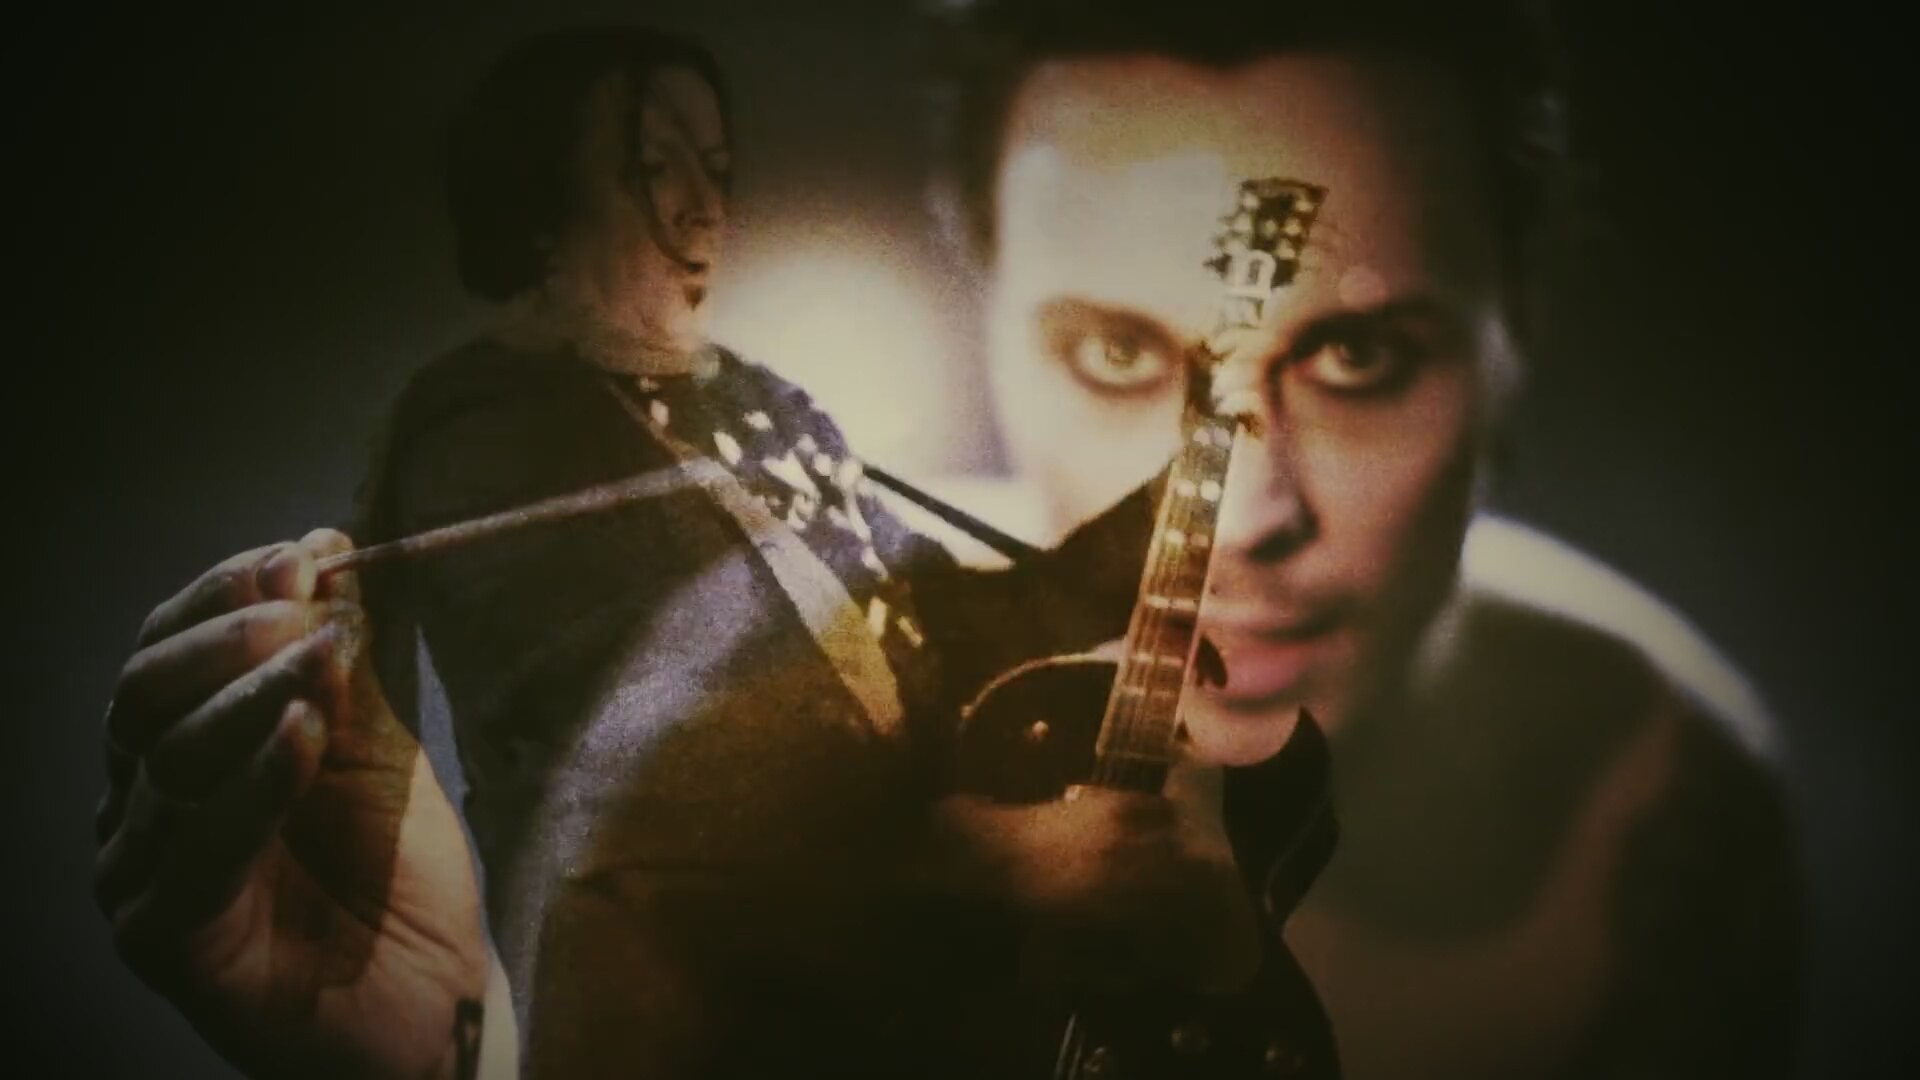 1920x1080 MGT & Ville Valo - Knowing Me Knowing You